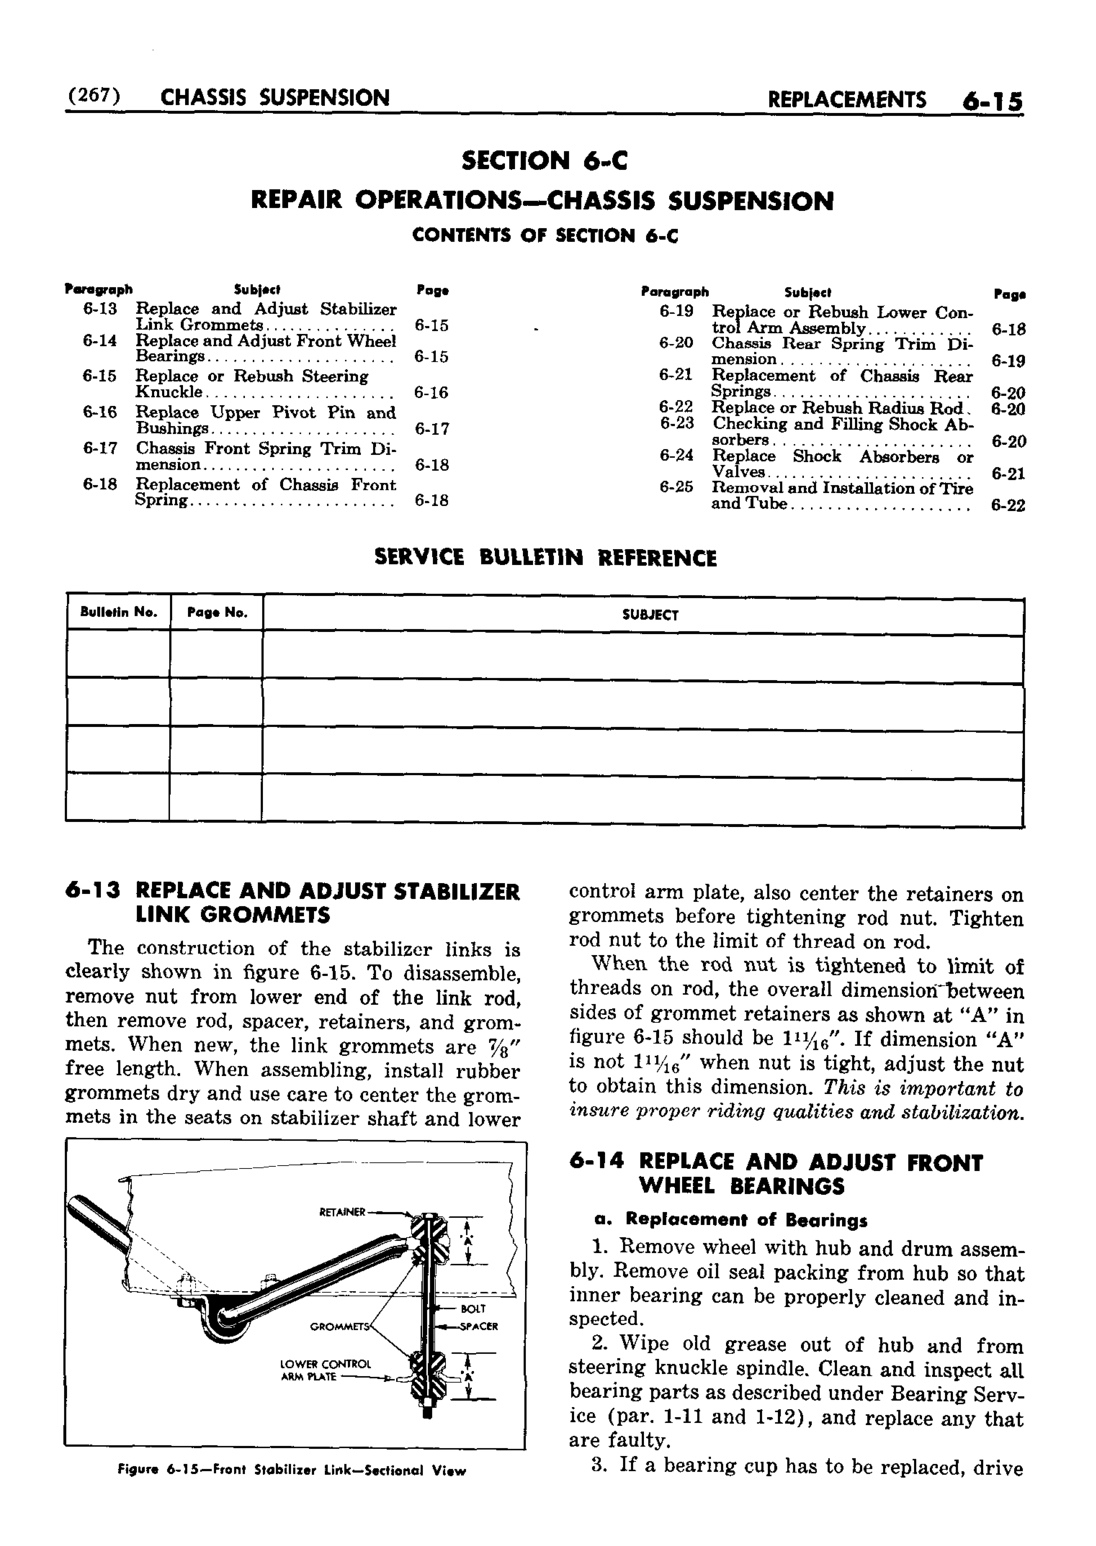 n_07 1952 Buick Shop Manual - Chassis Suspension-015-015.jpg